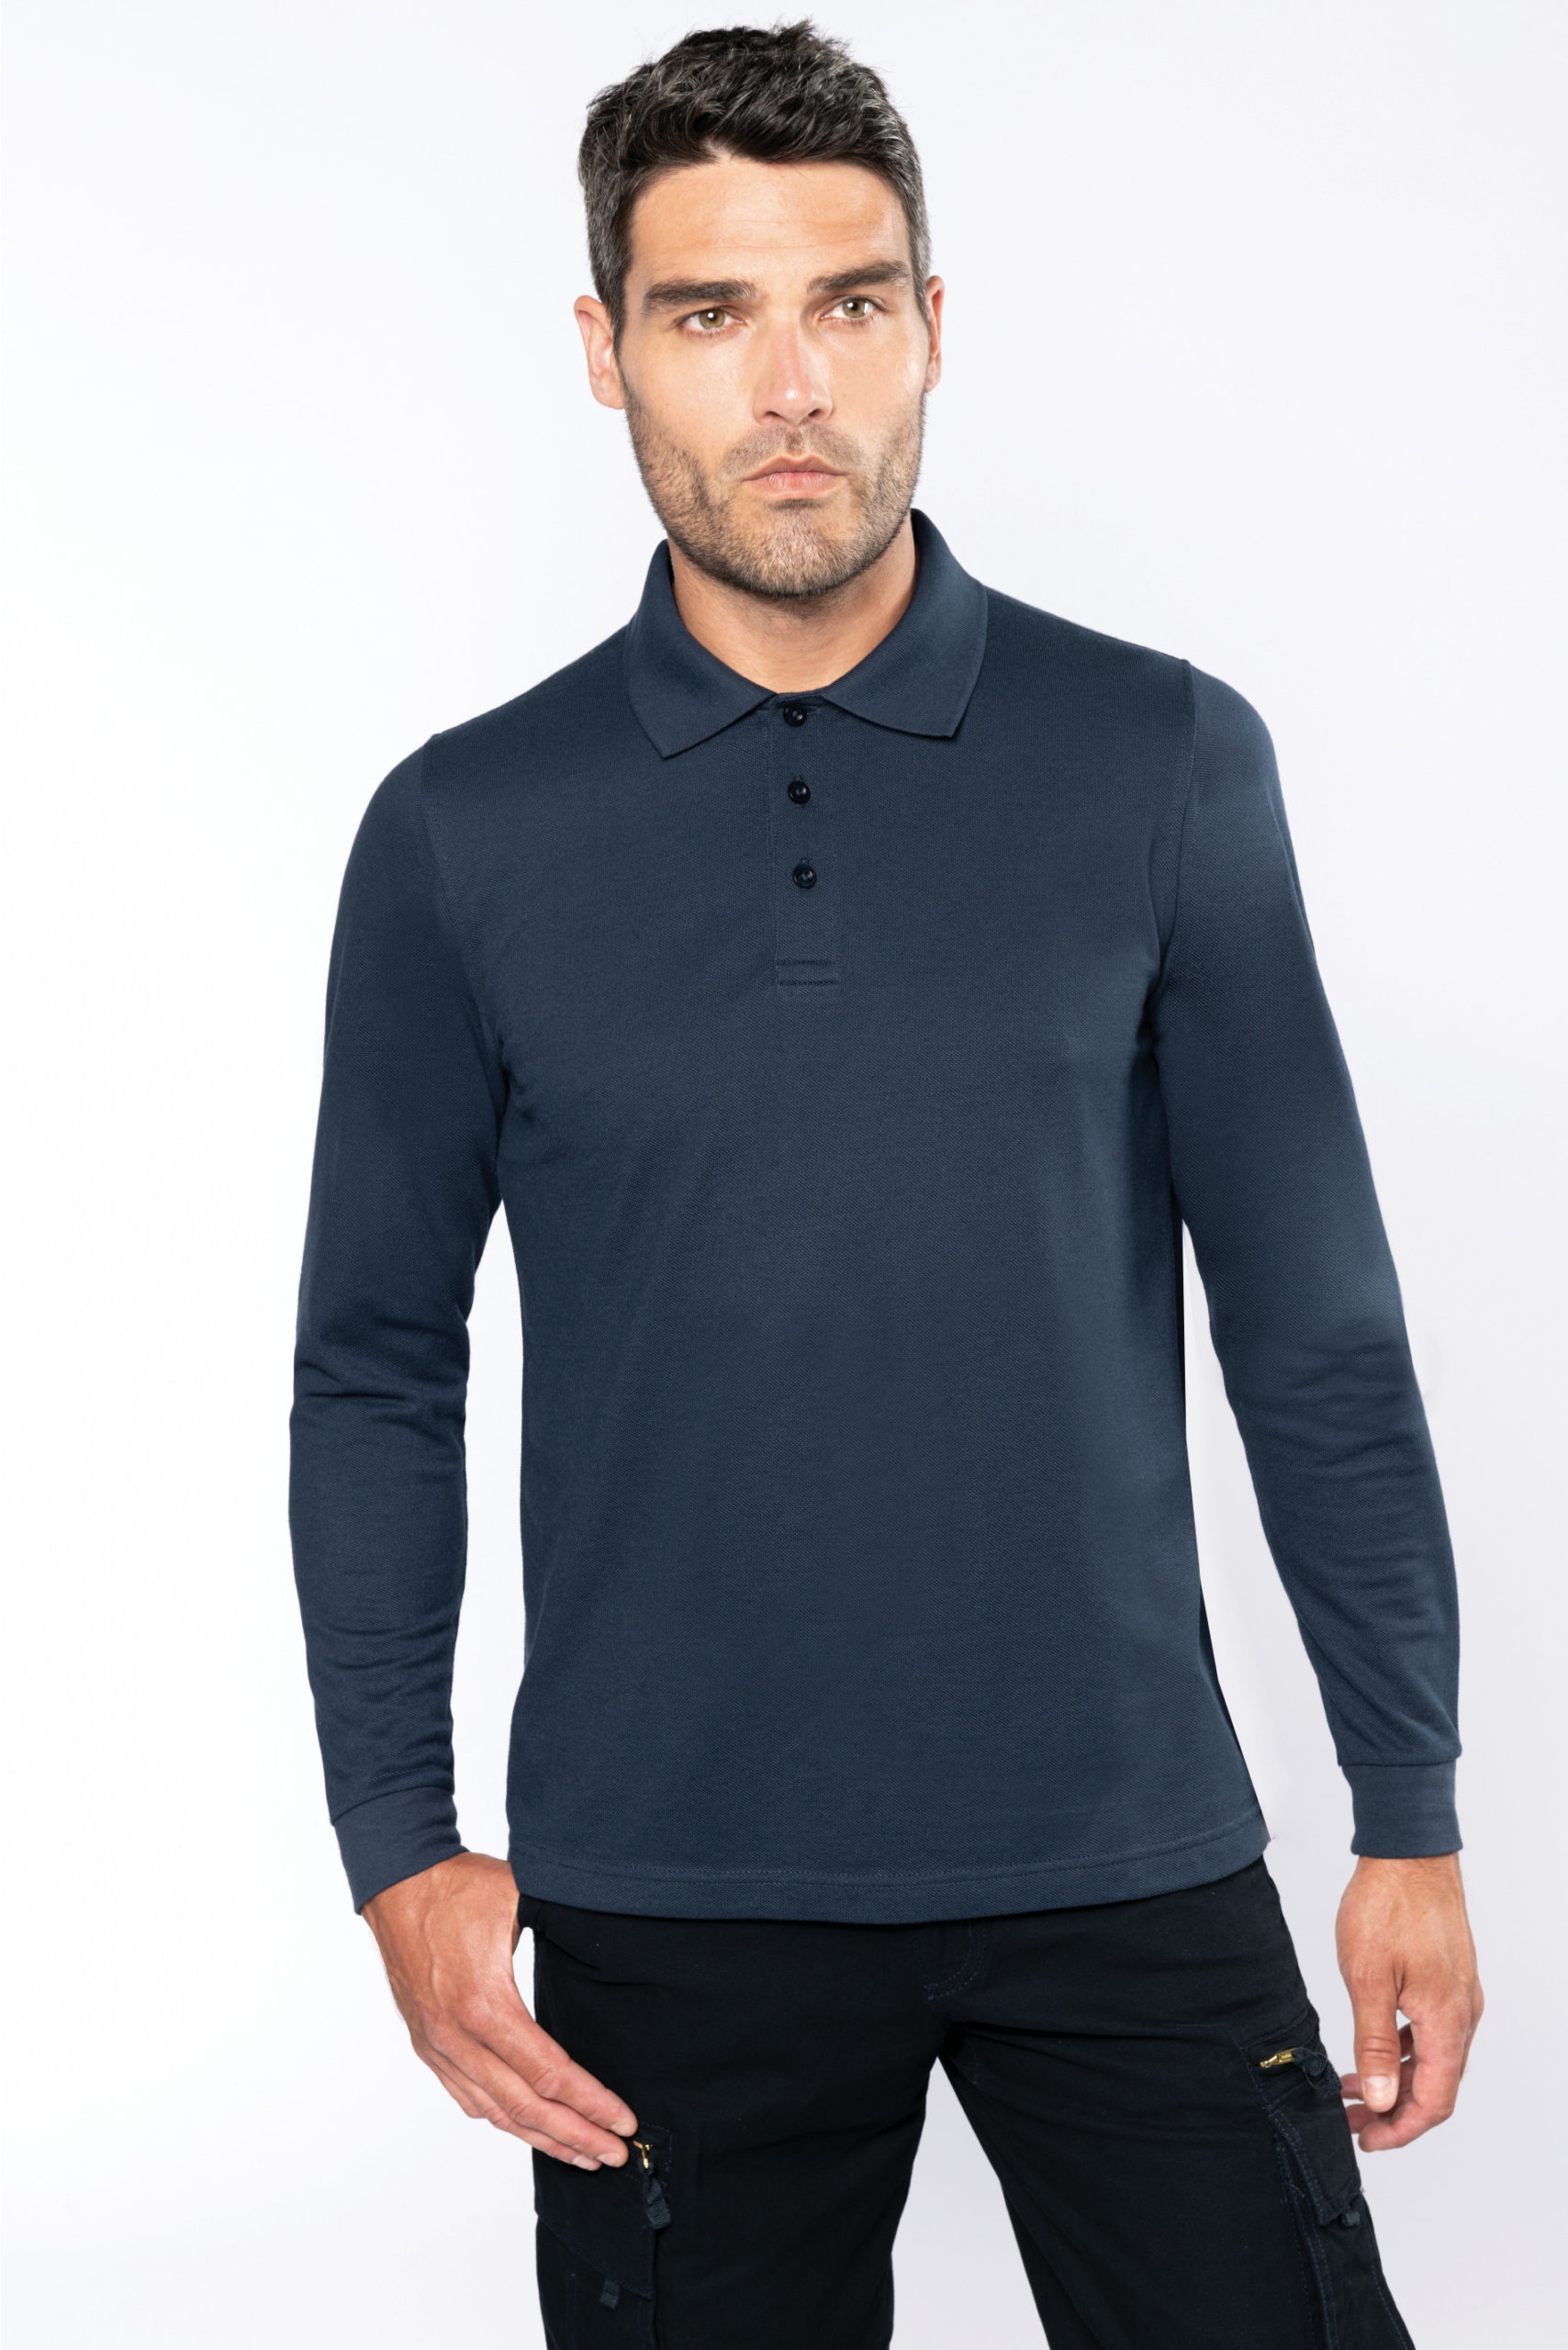 POLO MANCHES LONGUES HOMME KARIBAN